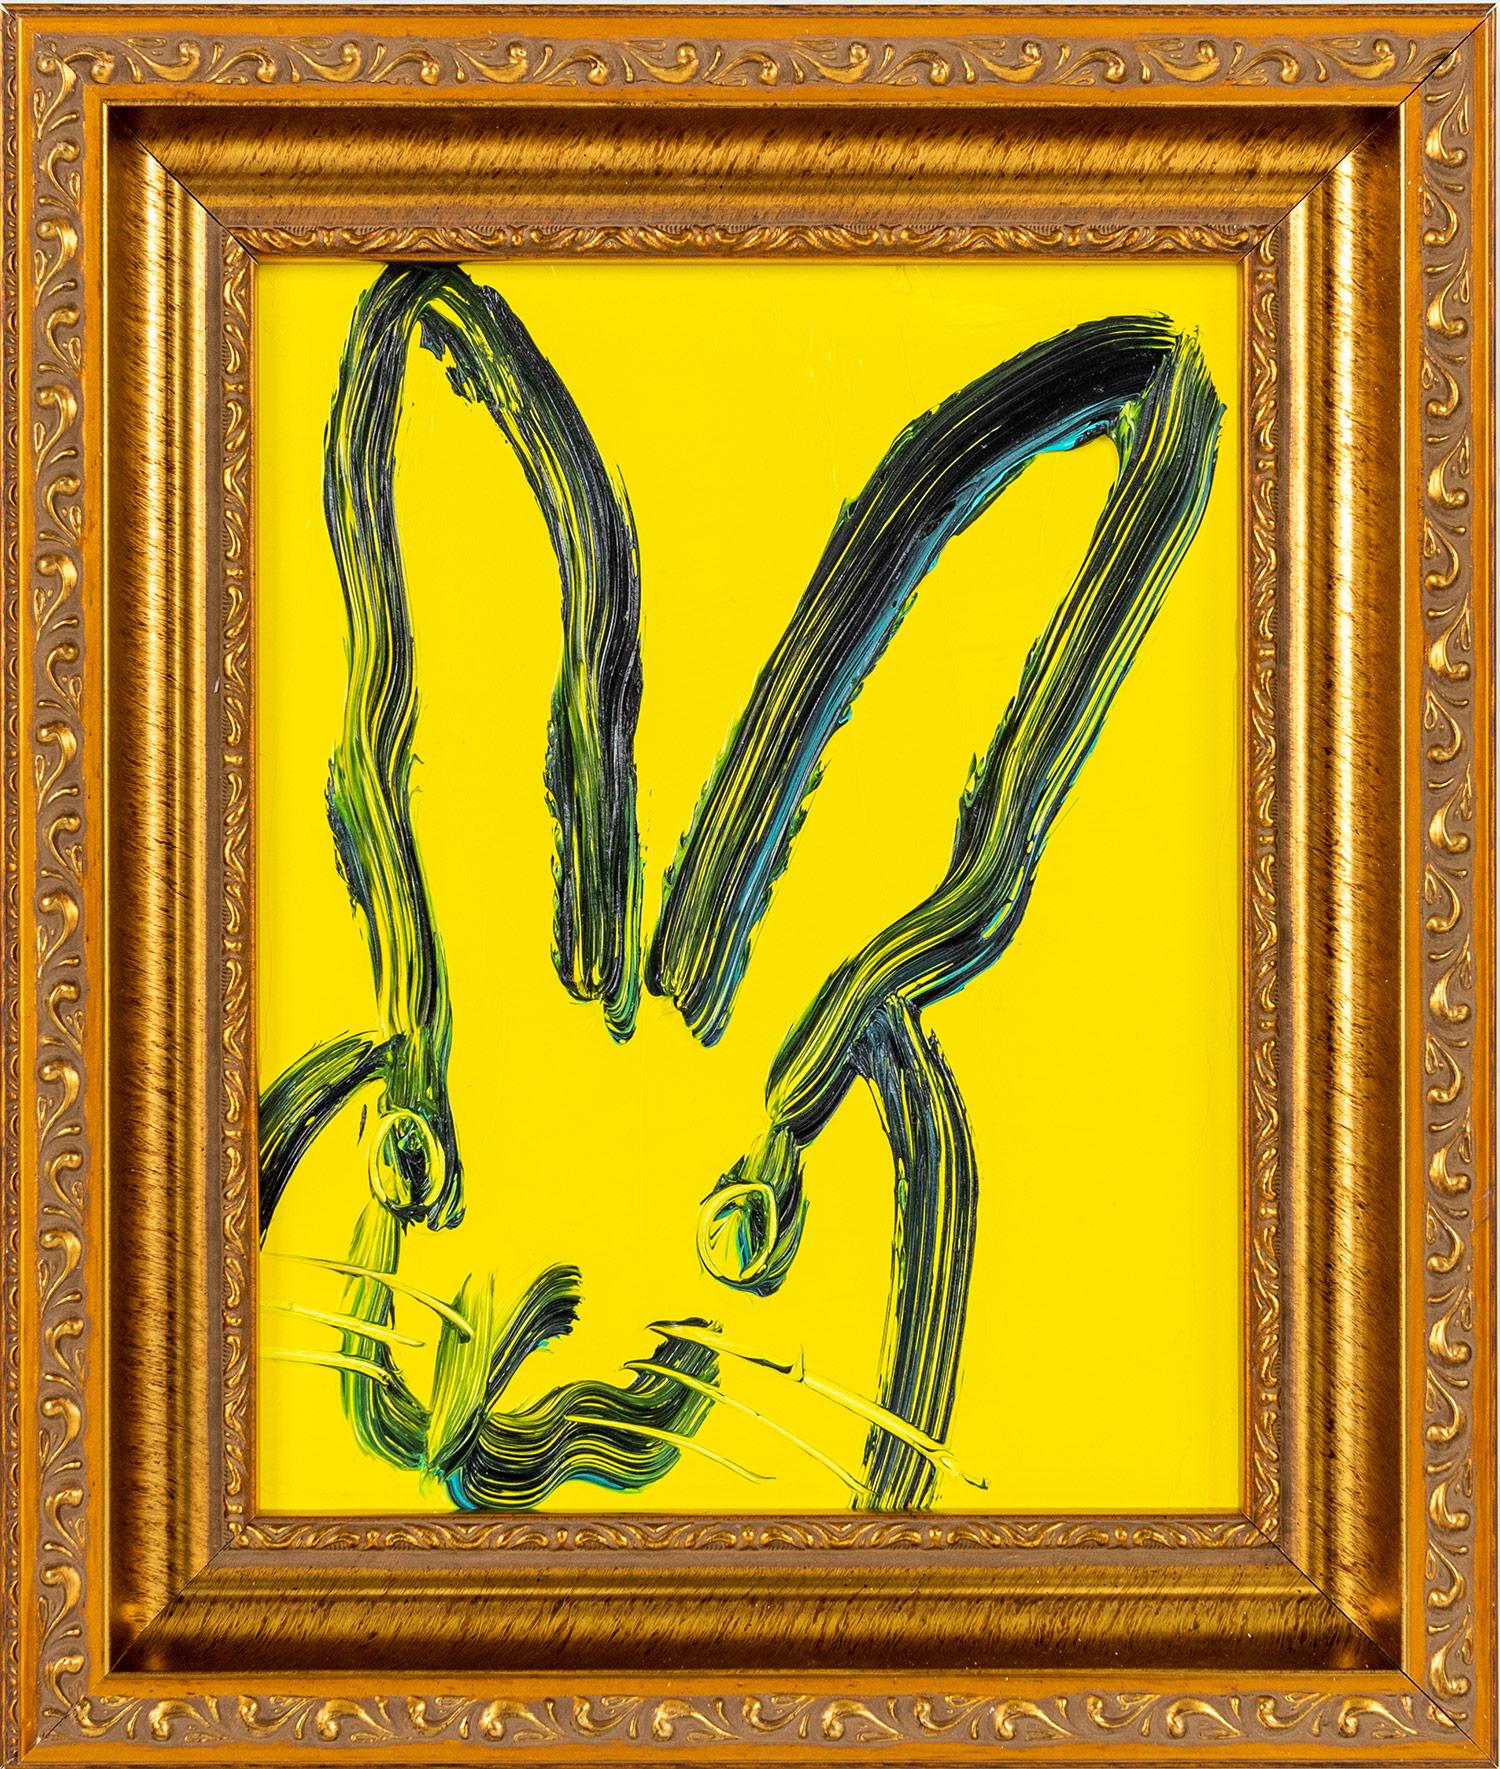 Hunt Slonem Abstract Painting - "Gracie" (Black Outlined Bunny on Electric Yellow) Oil Painting on Wood Panel